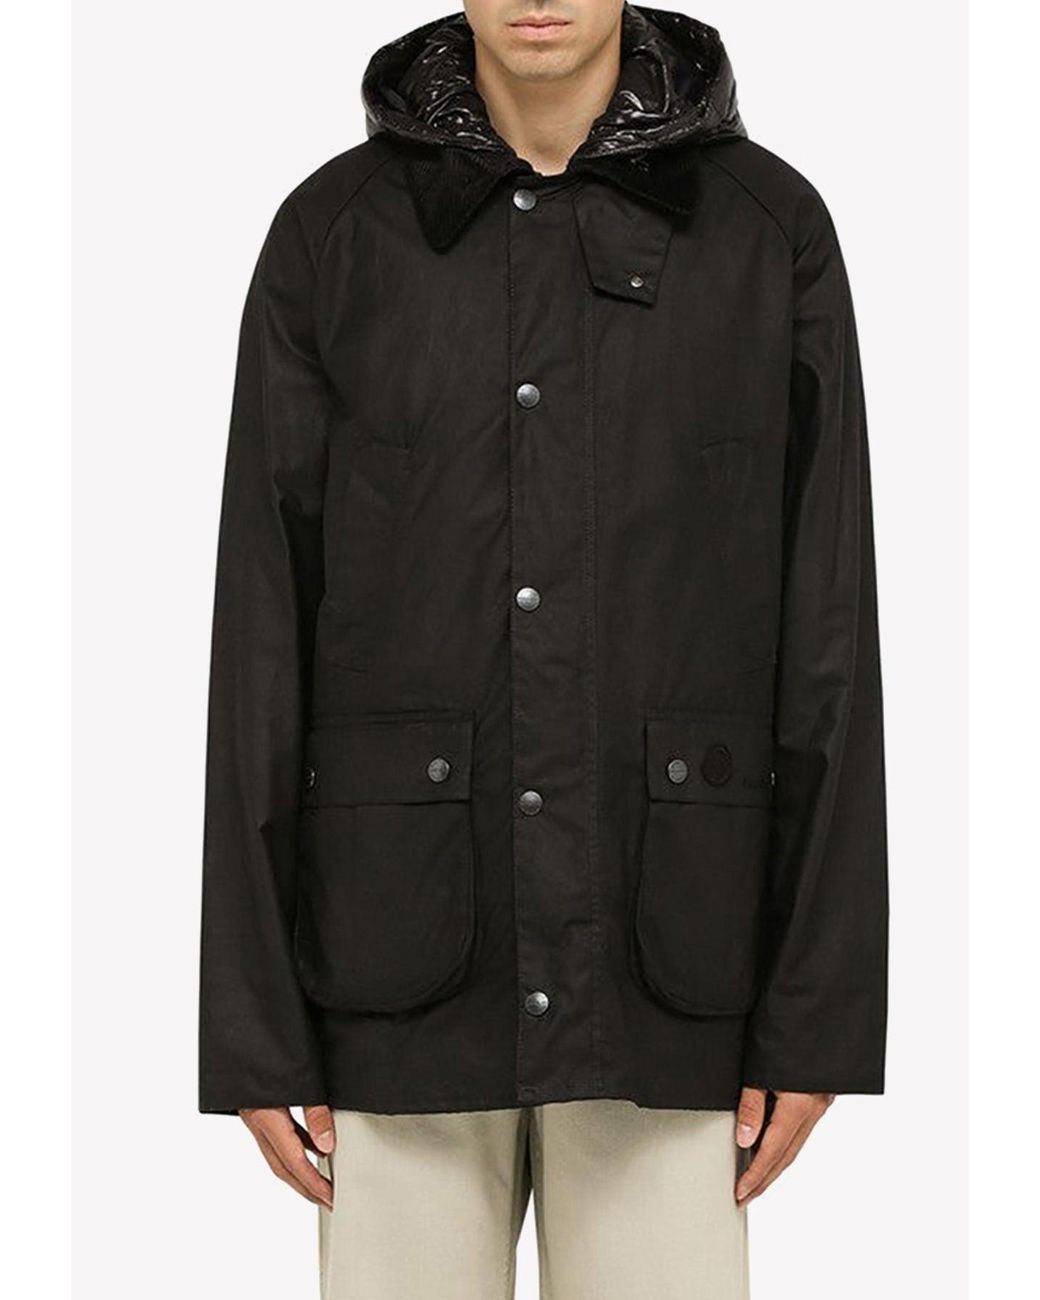 Moncler Genius The Barbour X Moncler 1952 Wight Down Jacket in Black ...